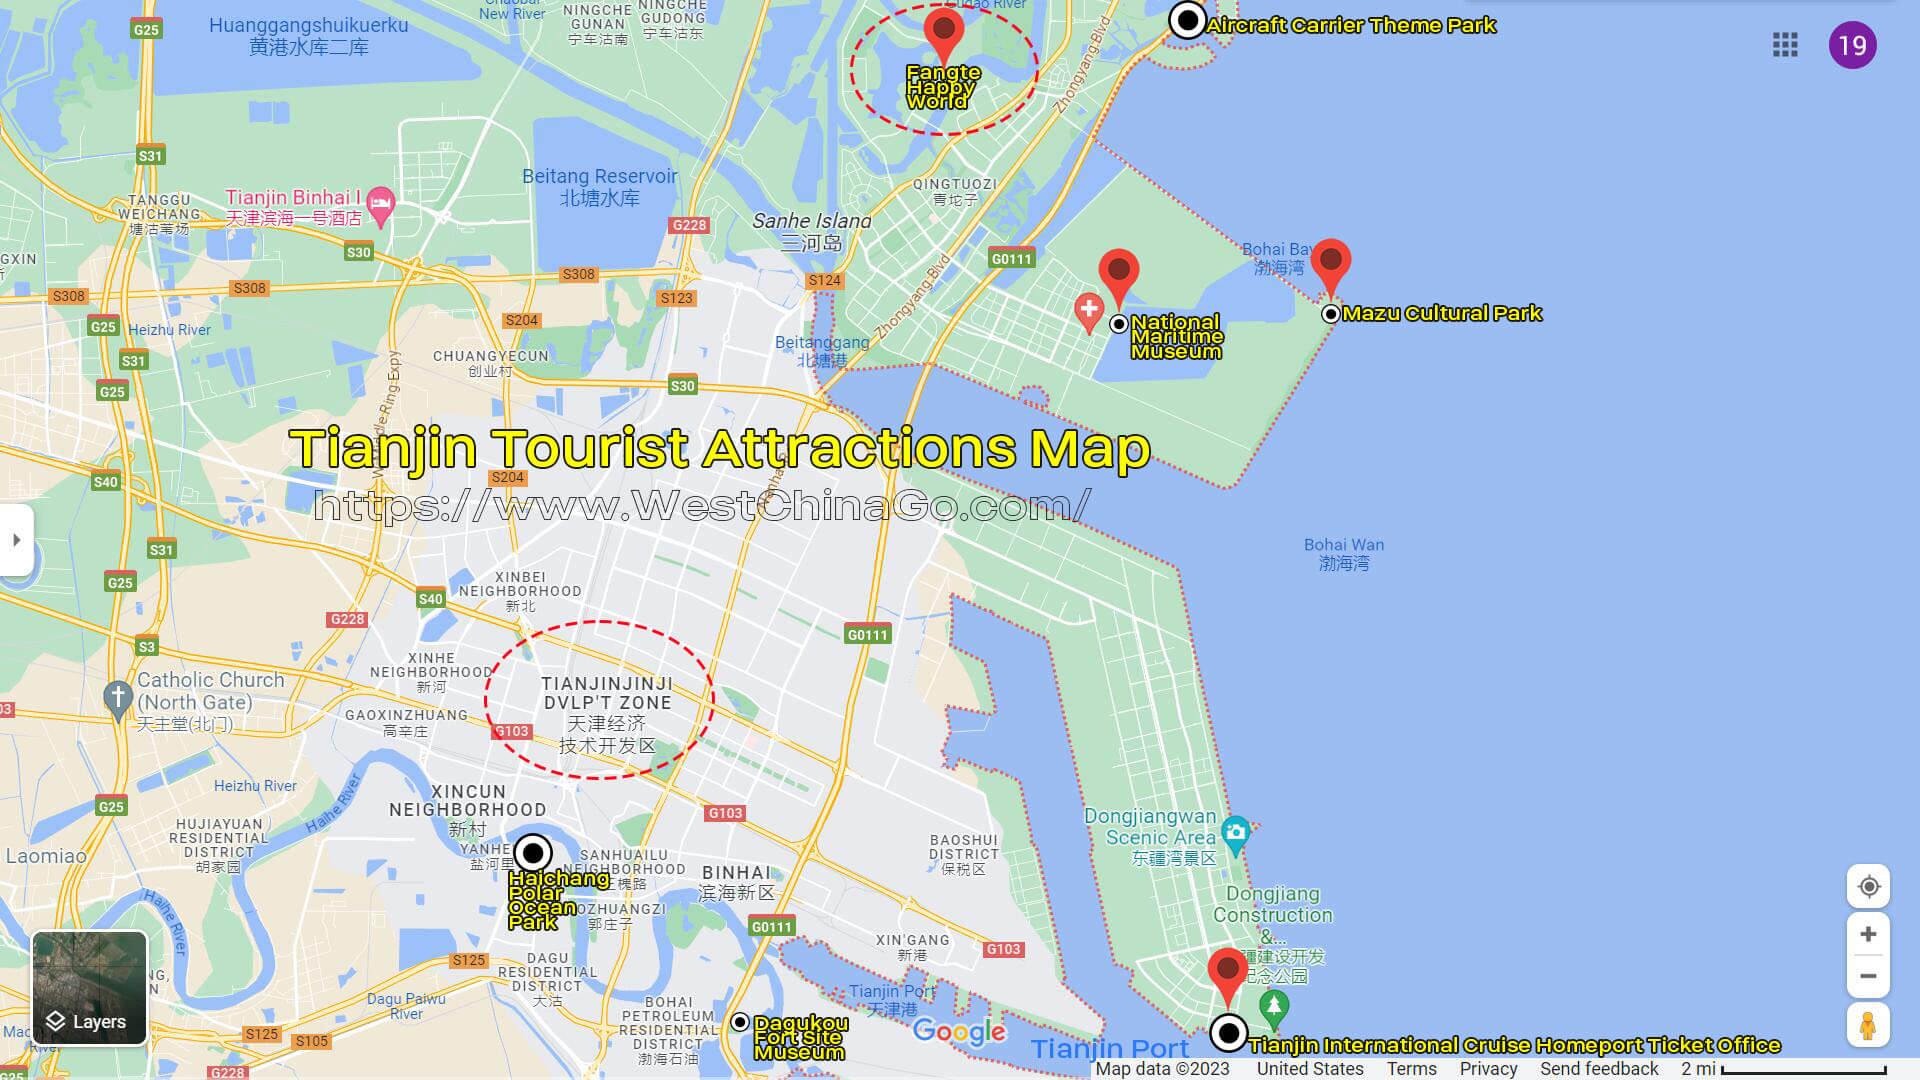 Tianjin Tourist Attractions Map